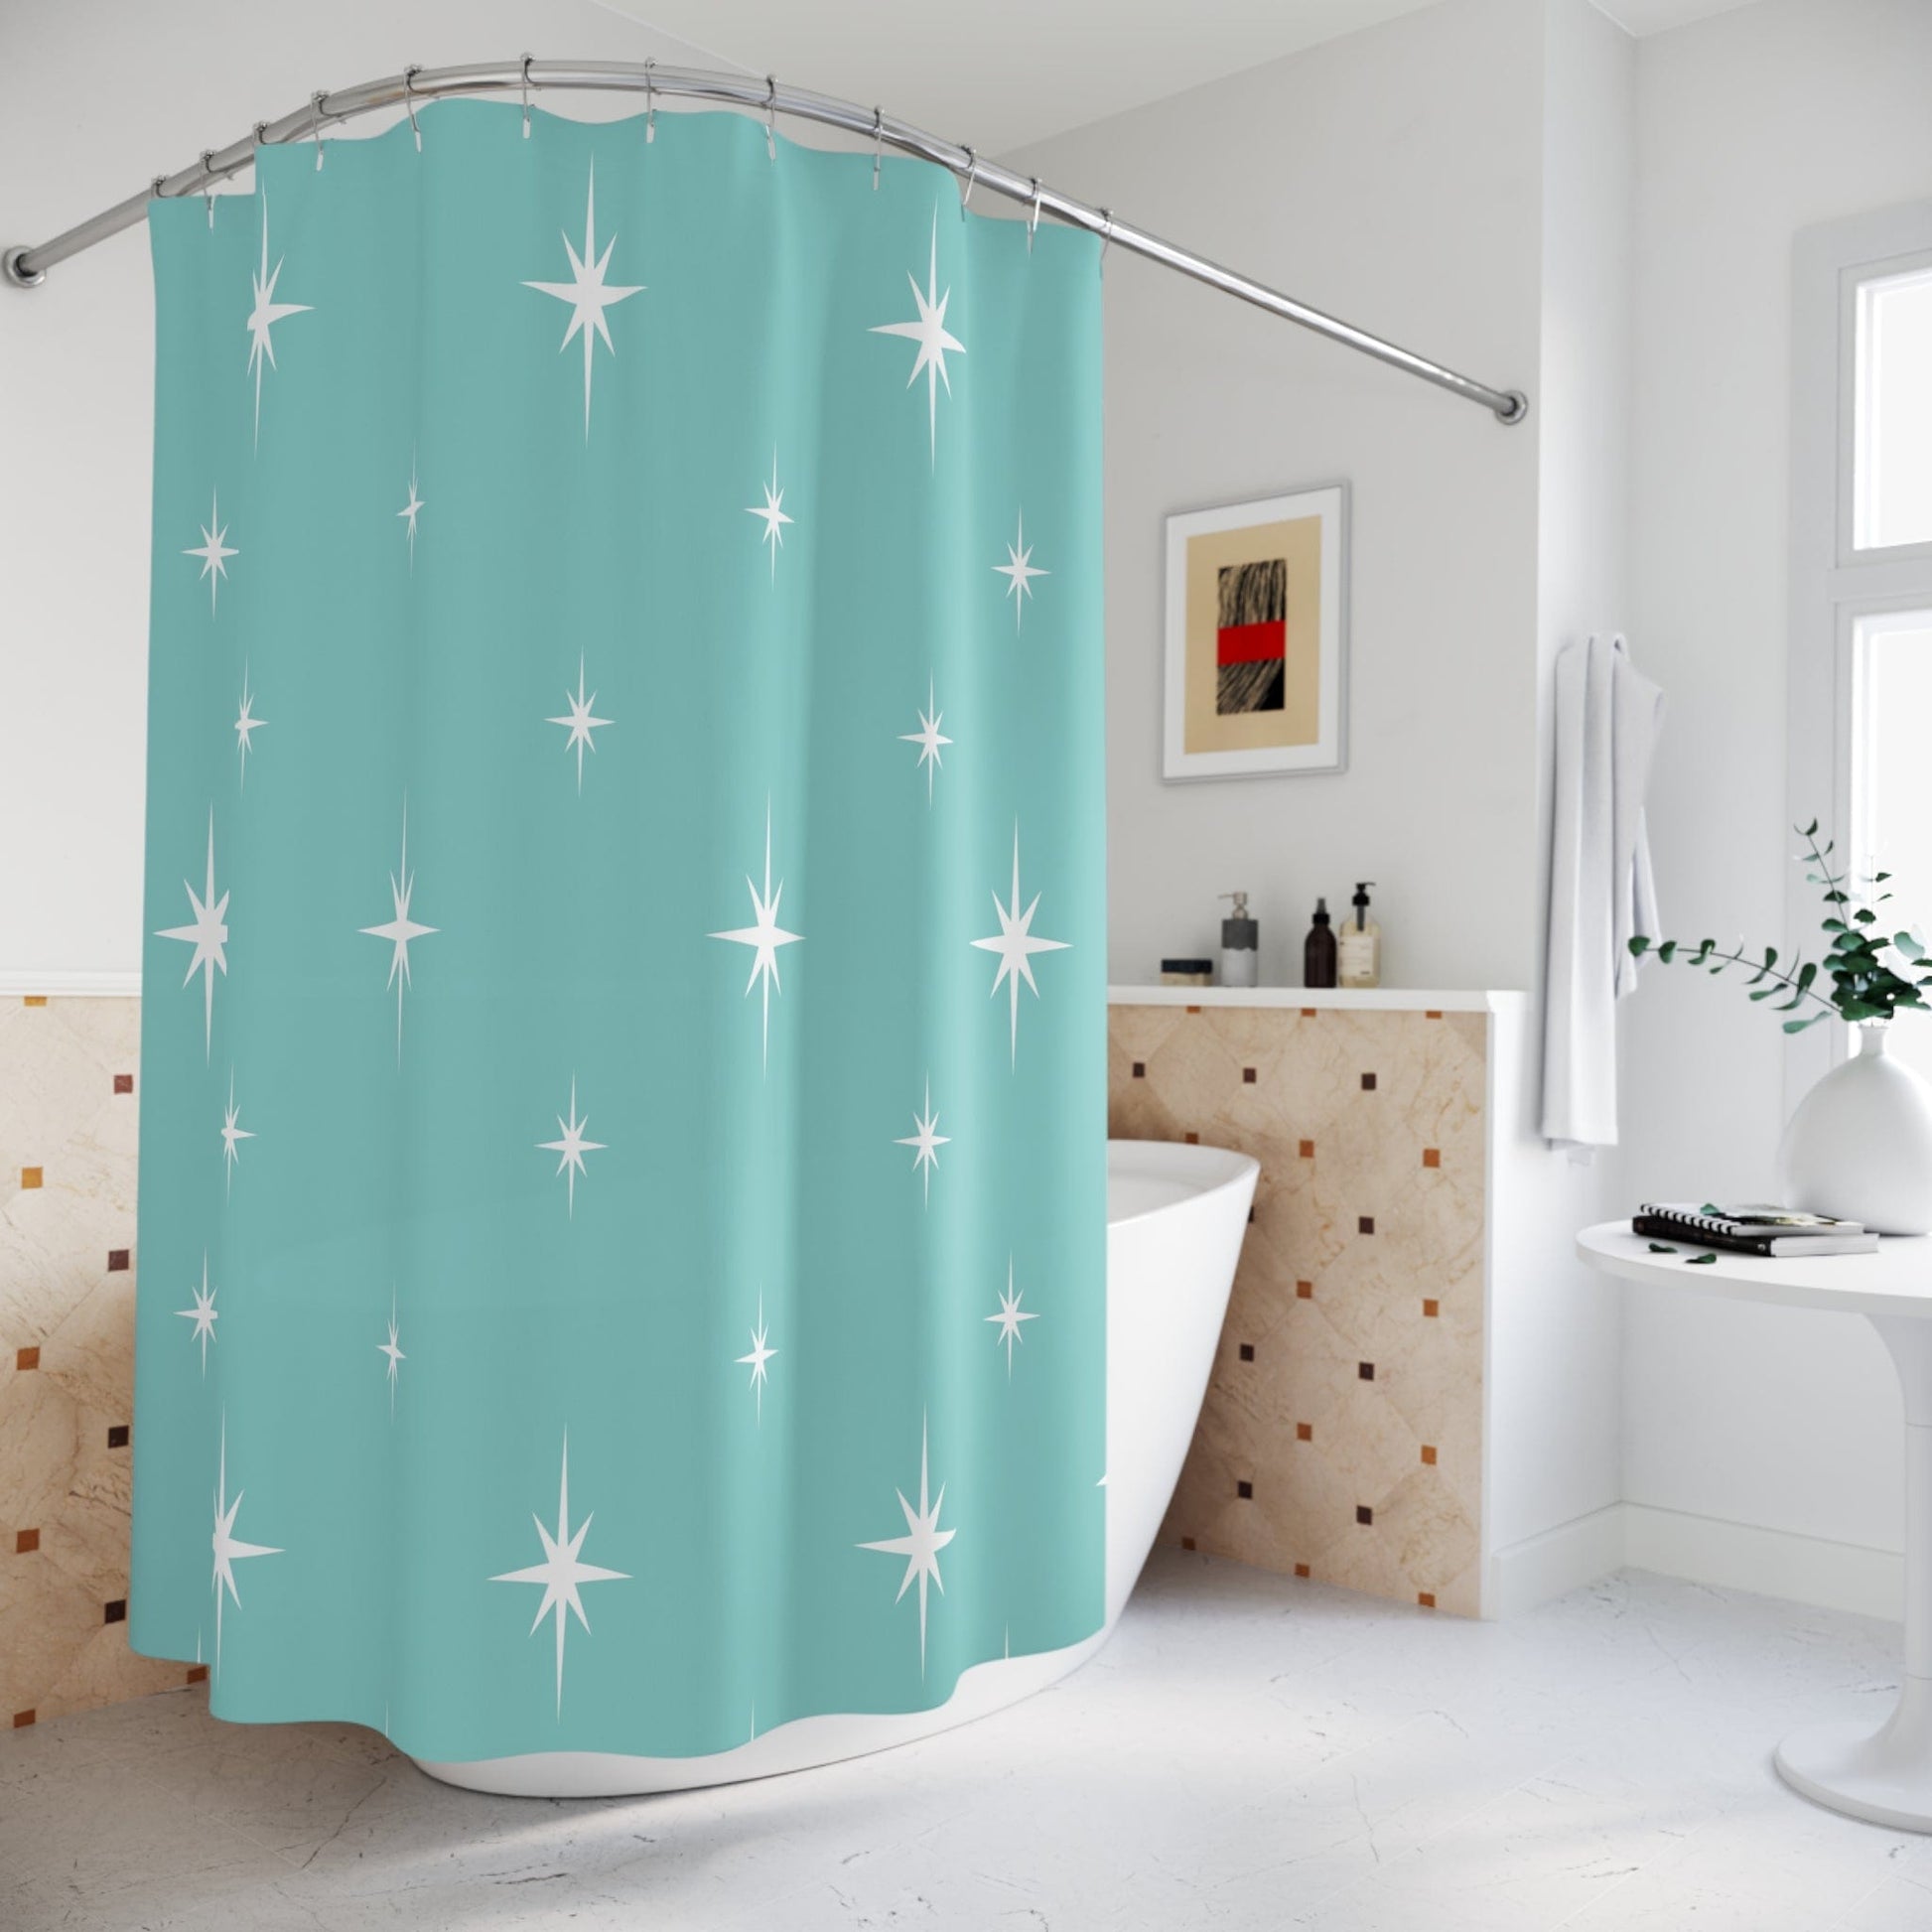 Kate McEnroe New York 50s Retro Mid Century Modern Atomic Starburst Shower Curtains in Vintage Turquoise and White Shower Curtains 70" × 74" S40-STB-BLU-7X7